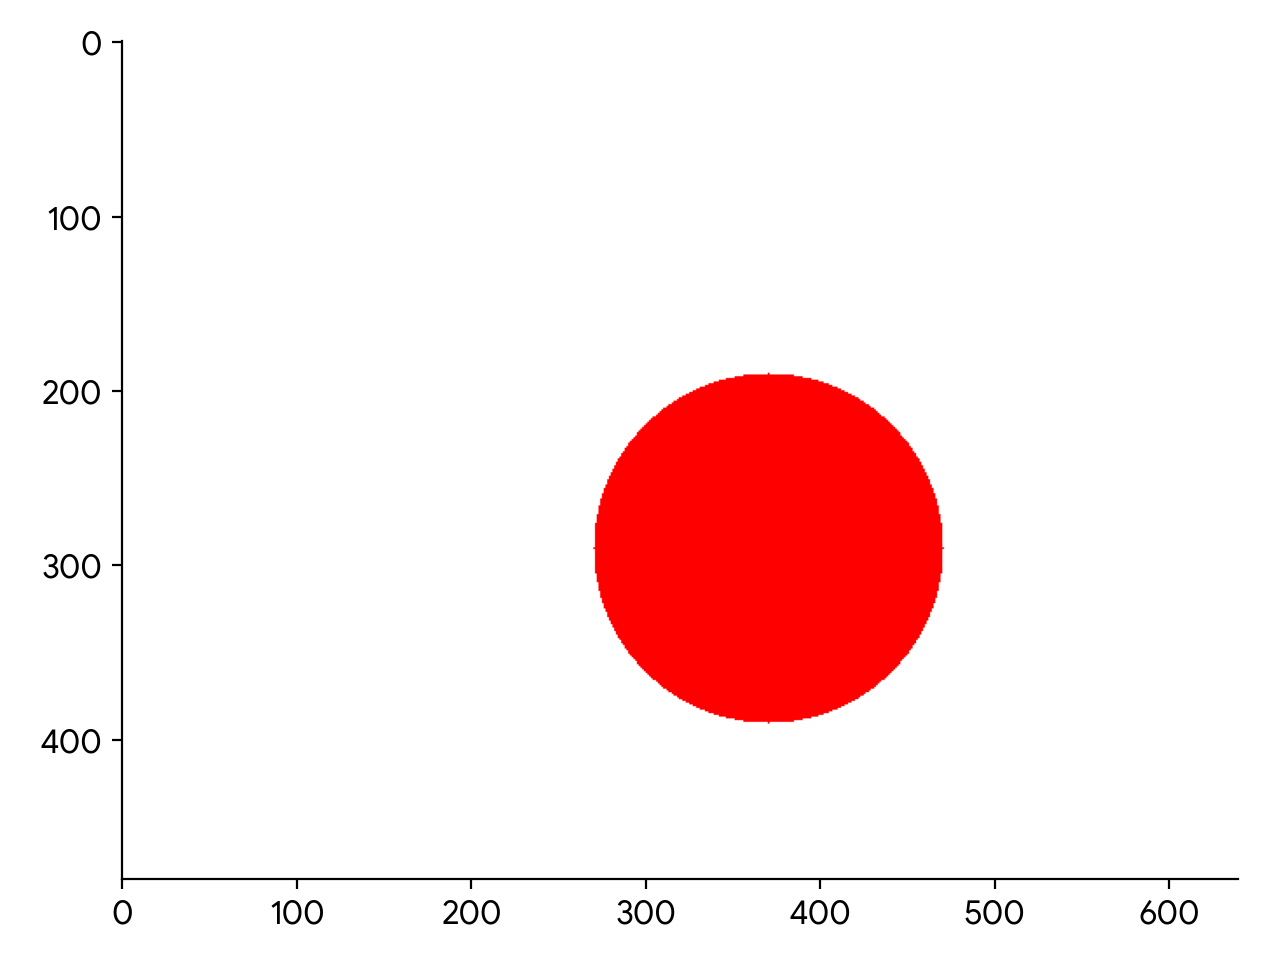 This code creates the following graph:

